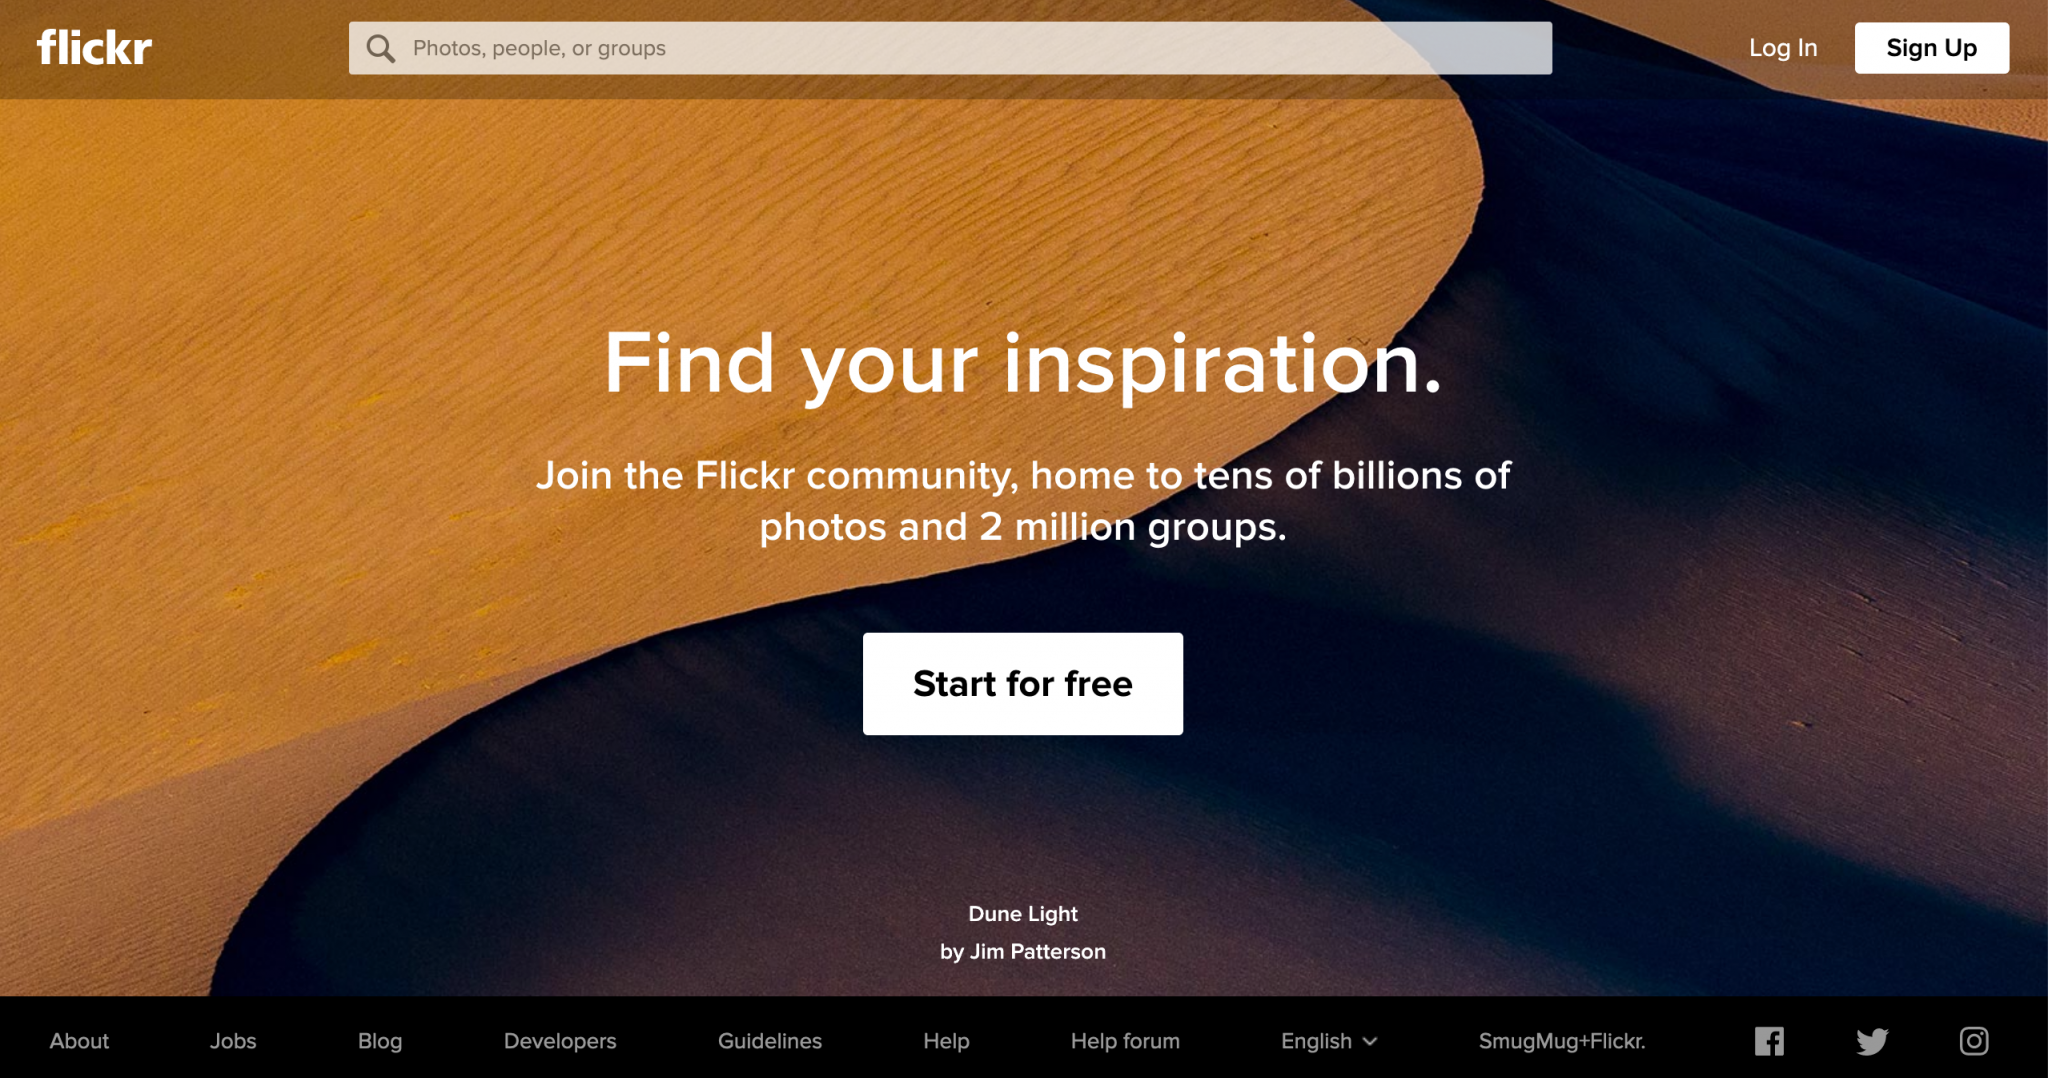 Flickr homepage to find royalty free images for your WordPress blog posts.